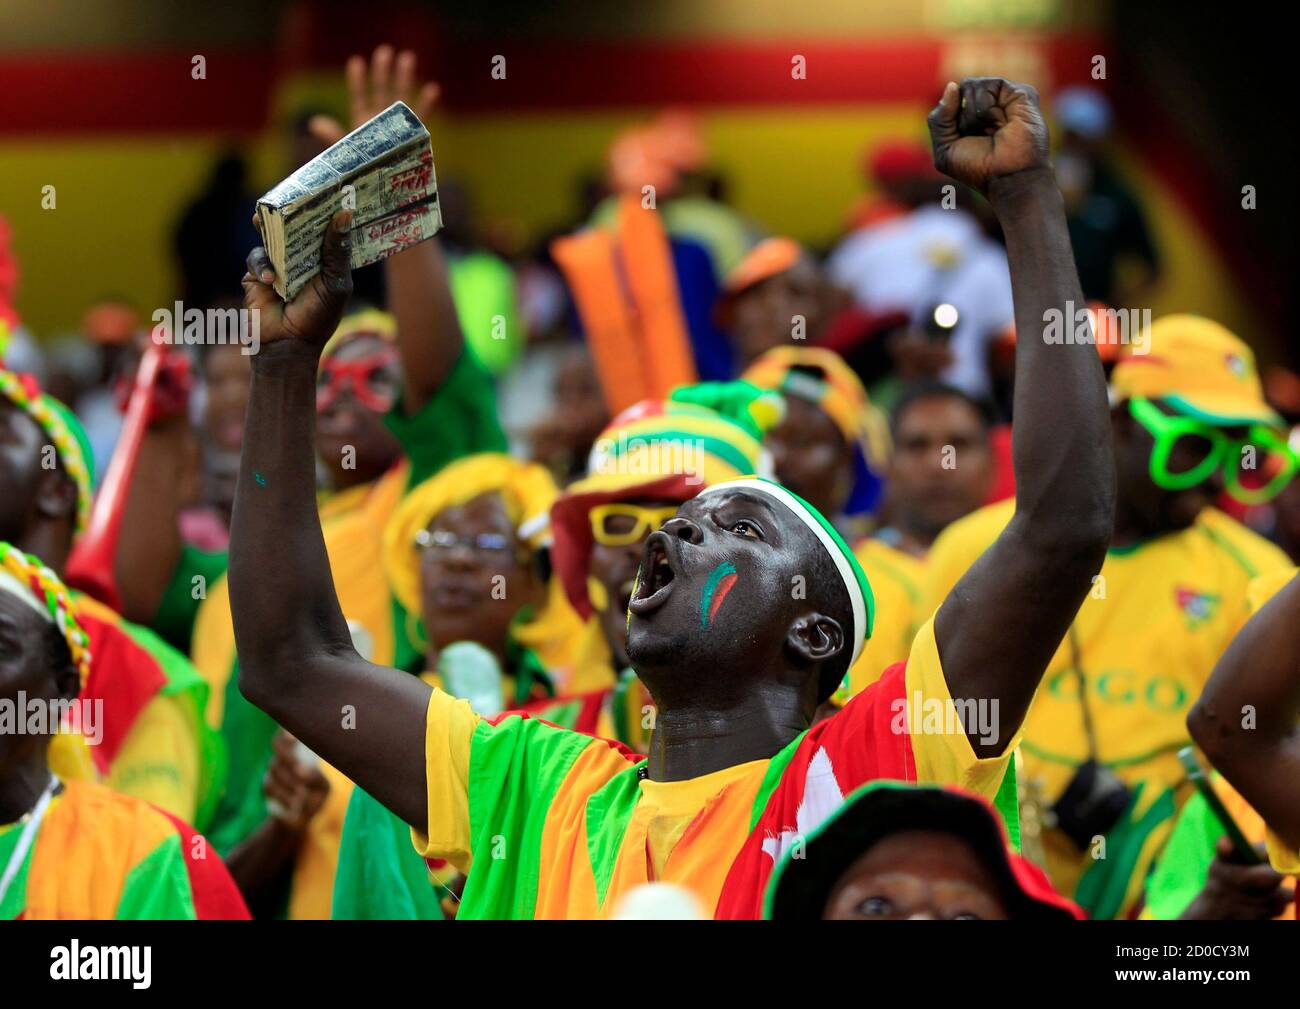 Supporters of Burkina Faso cheer during their African Cup of Nations (AFCON 2013) quarter-final soccer match against Togo at the Mbombela Stadium in Nelspruit, February 3, 2013. REUTERS/Thomas Mukoya (SOUTH AFRICA - Tags: SPORT SOCCER) Stock Photo